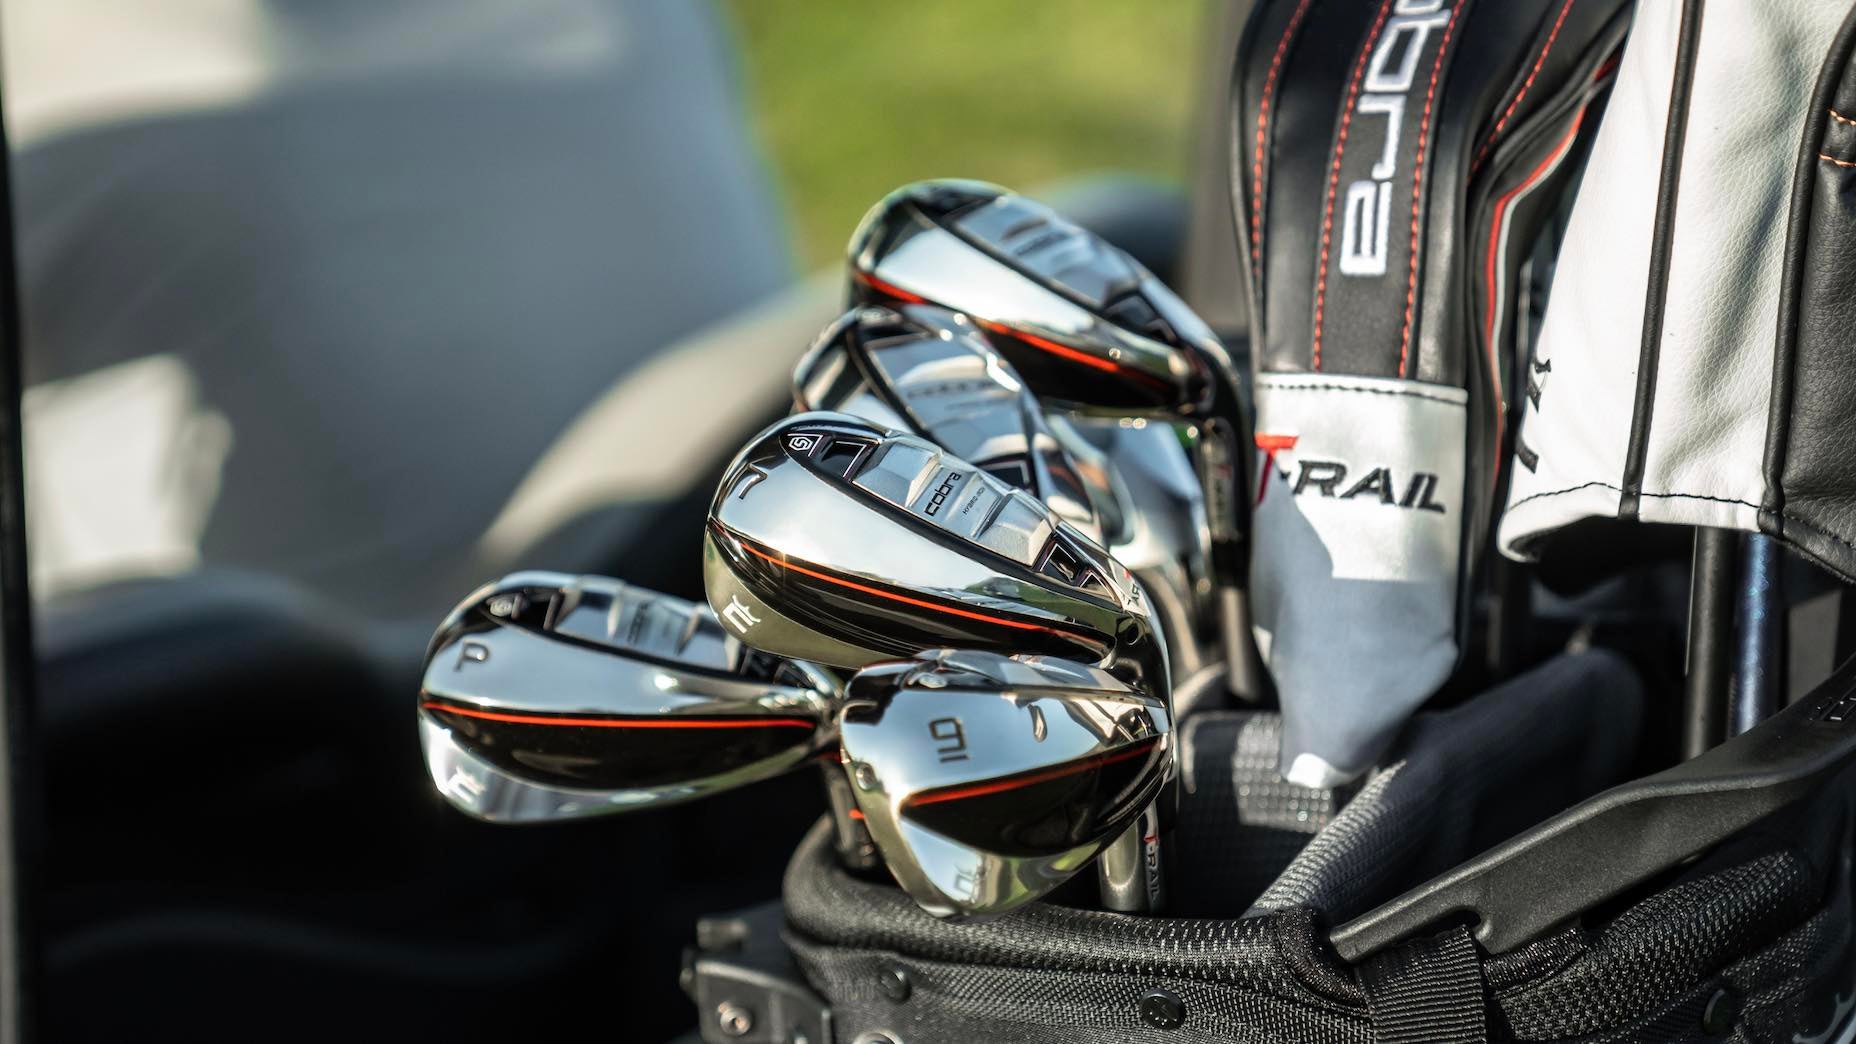 Cobra TRail hybrid irons with H.O.T. Face technology First Look